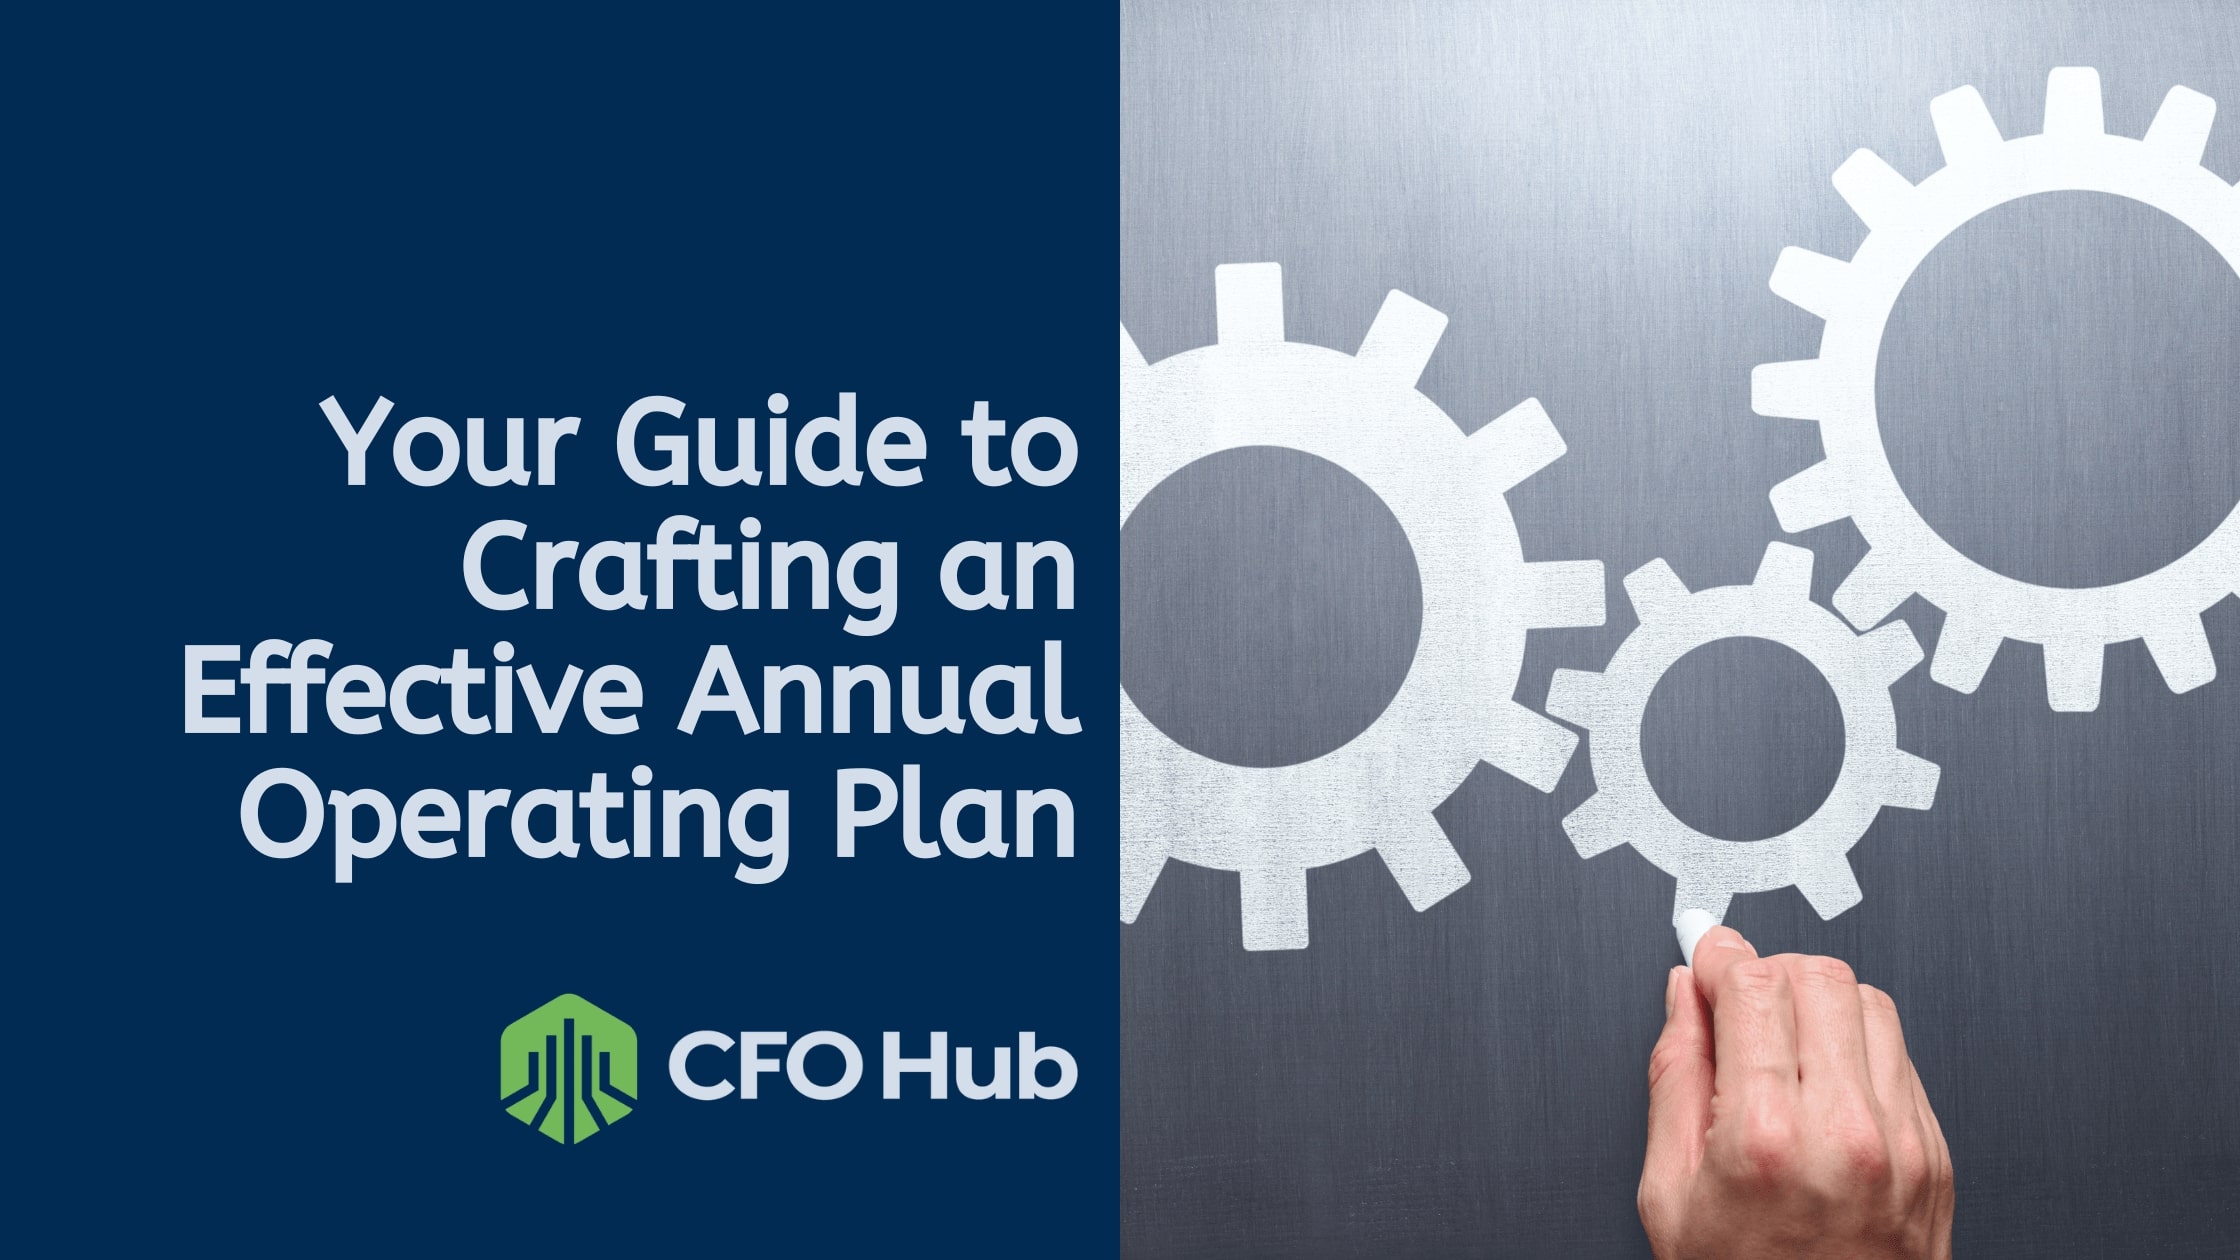 A dark blue background with white text reads, "Your Guide to Crafting an Effective Annual Operating Plan." It features a hand adjusting three interlocking gear icons. The CFO Hub logo appears in the bottom left corner, underscoring the importance of a solid plan.